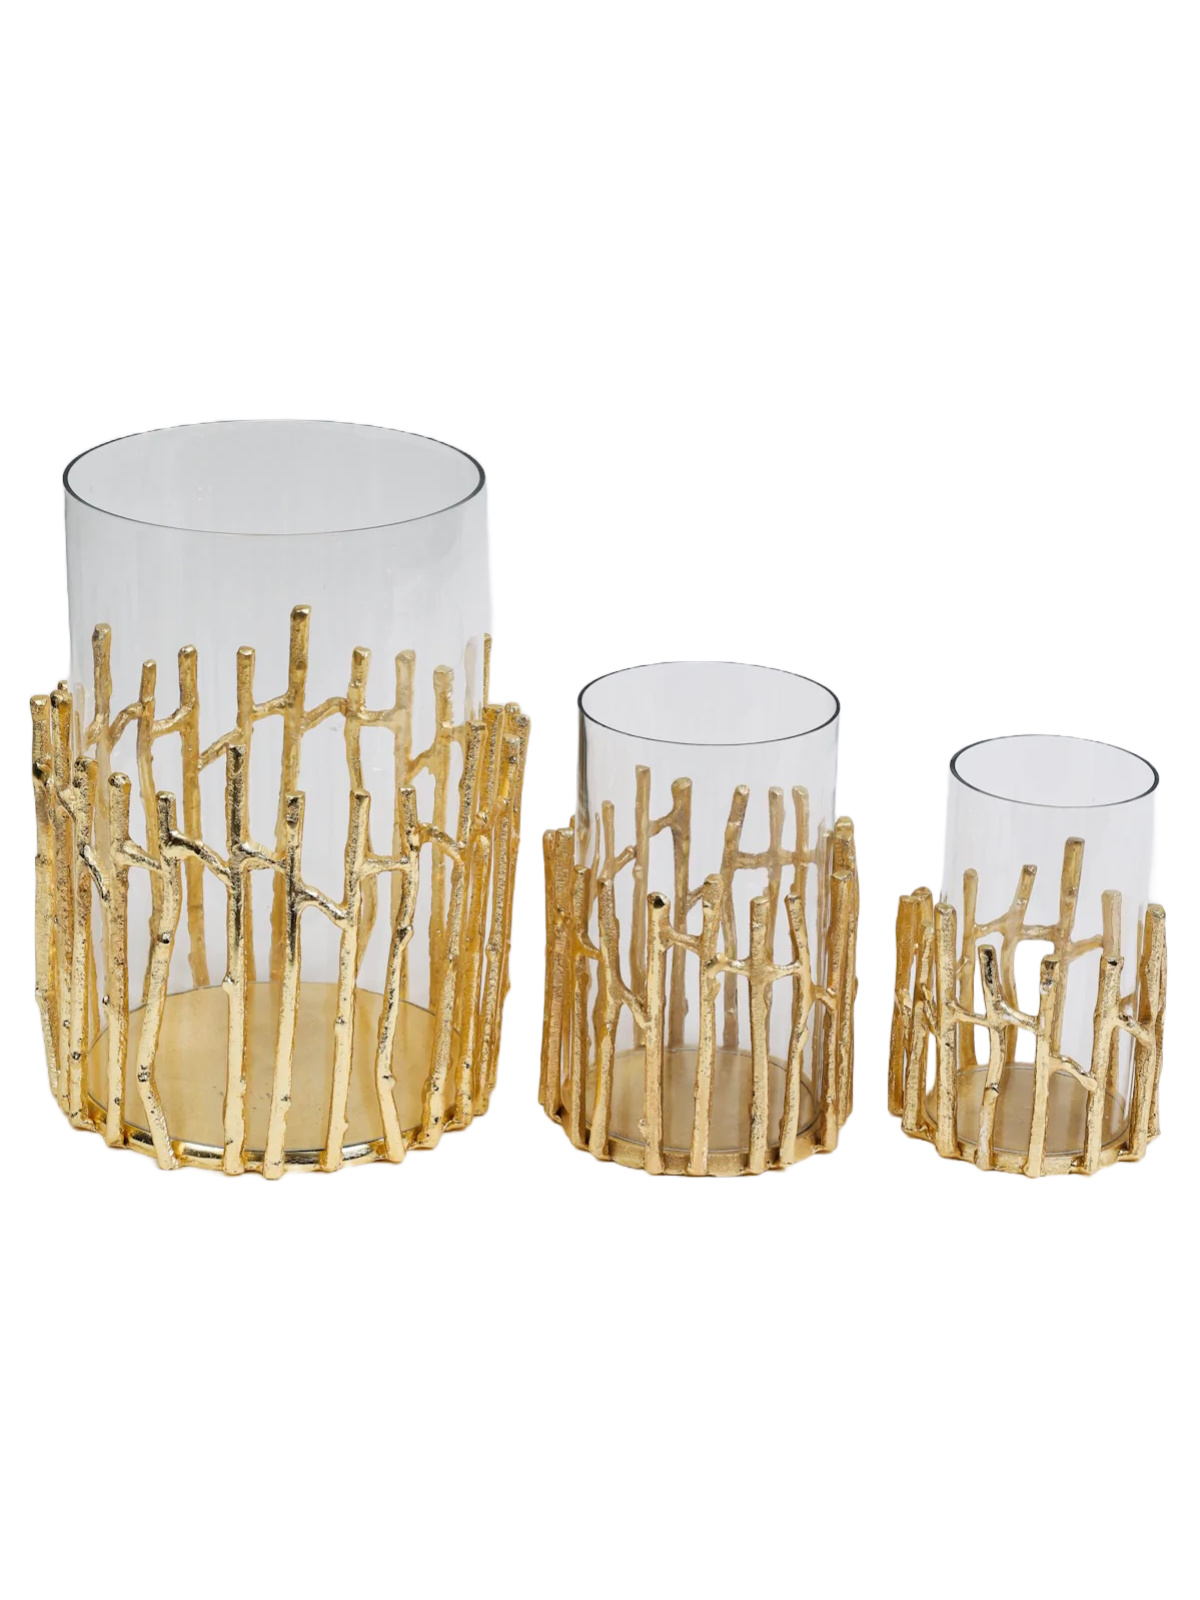 Glass Hurricane Floral Vase with Gold Twig Design. Available in 3 Sizes | KYA Home Decor.